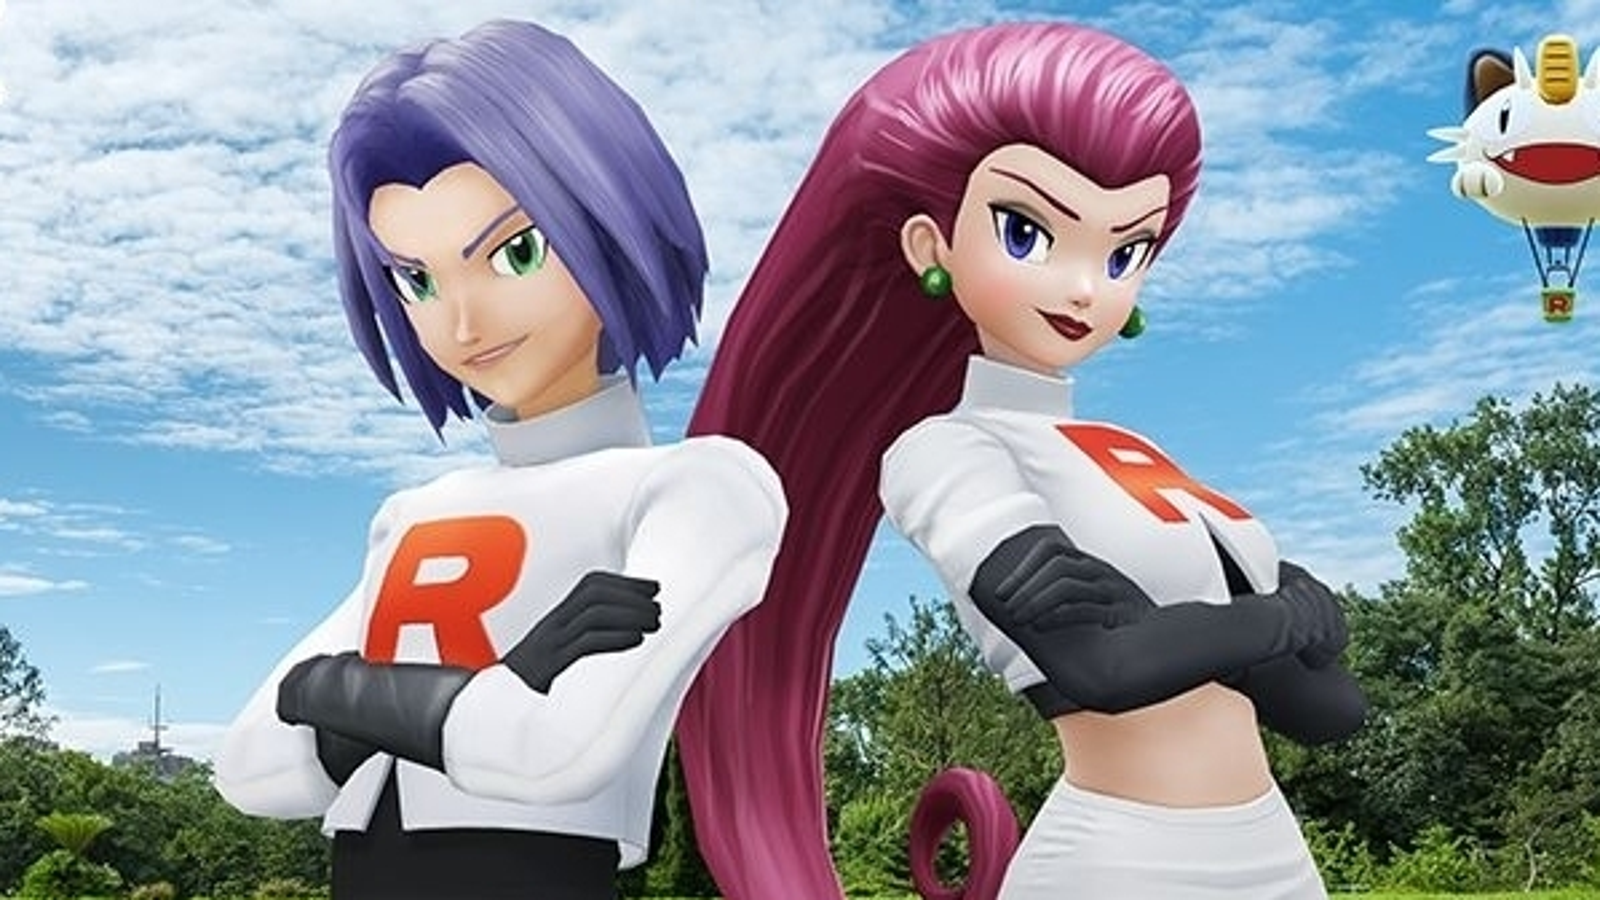 Team Rocket is, or at least WAS, known for trying to take other